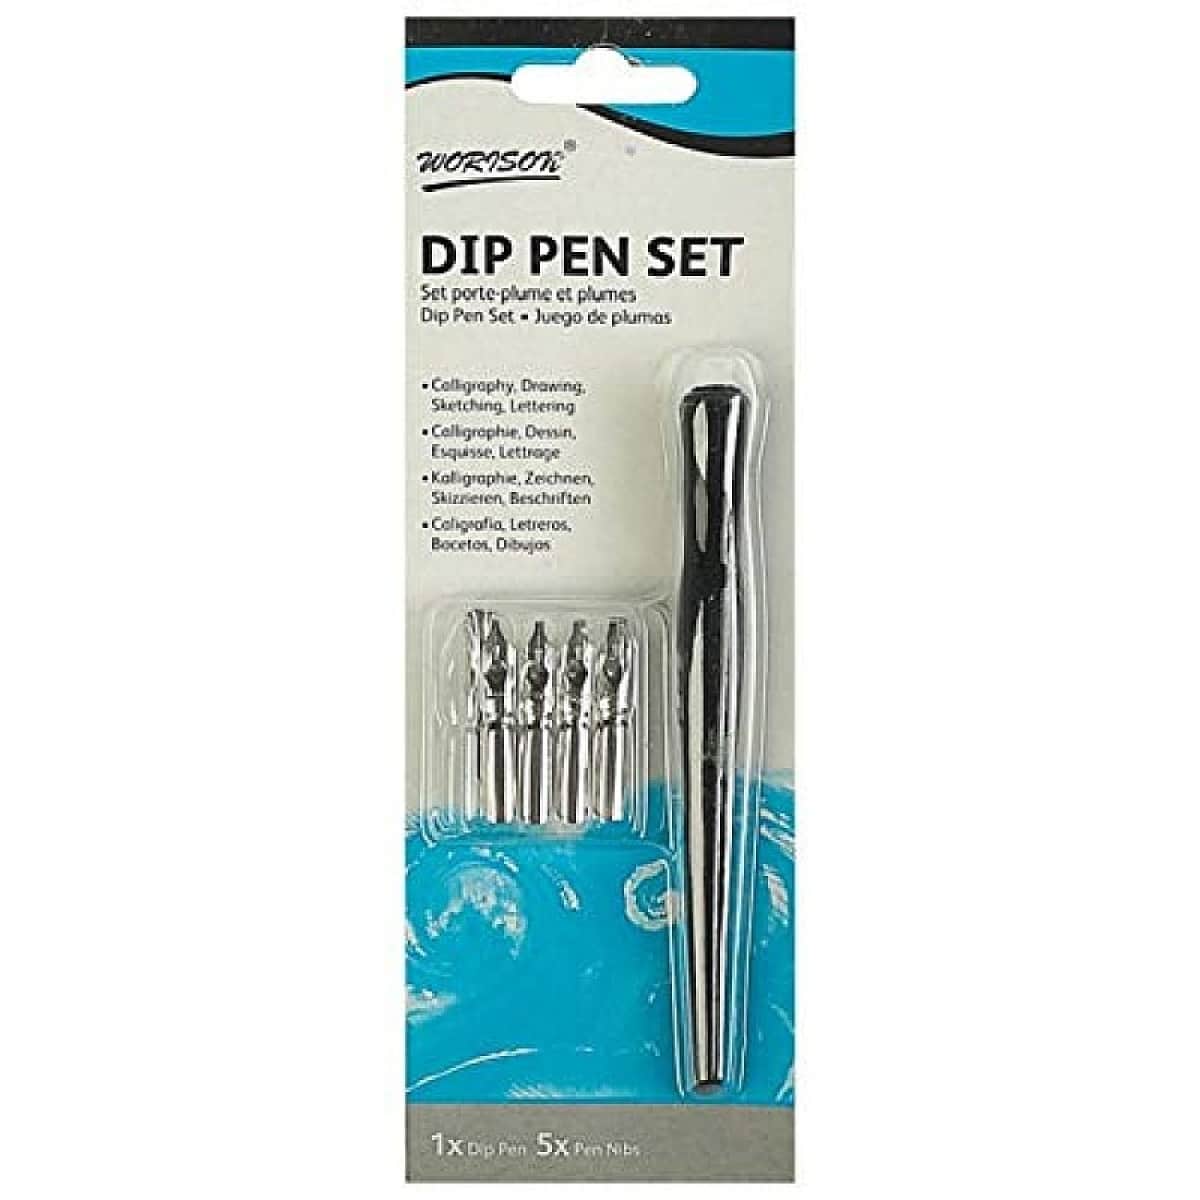 Dip Pen Set For Calligraphy, Drawing, Sketching, Lettering